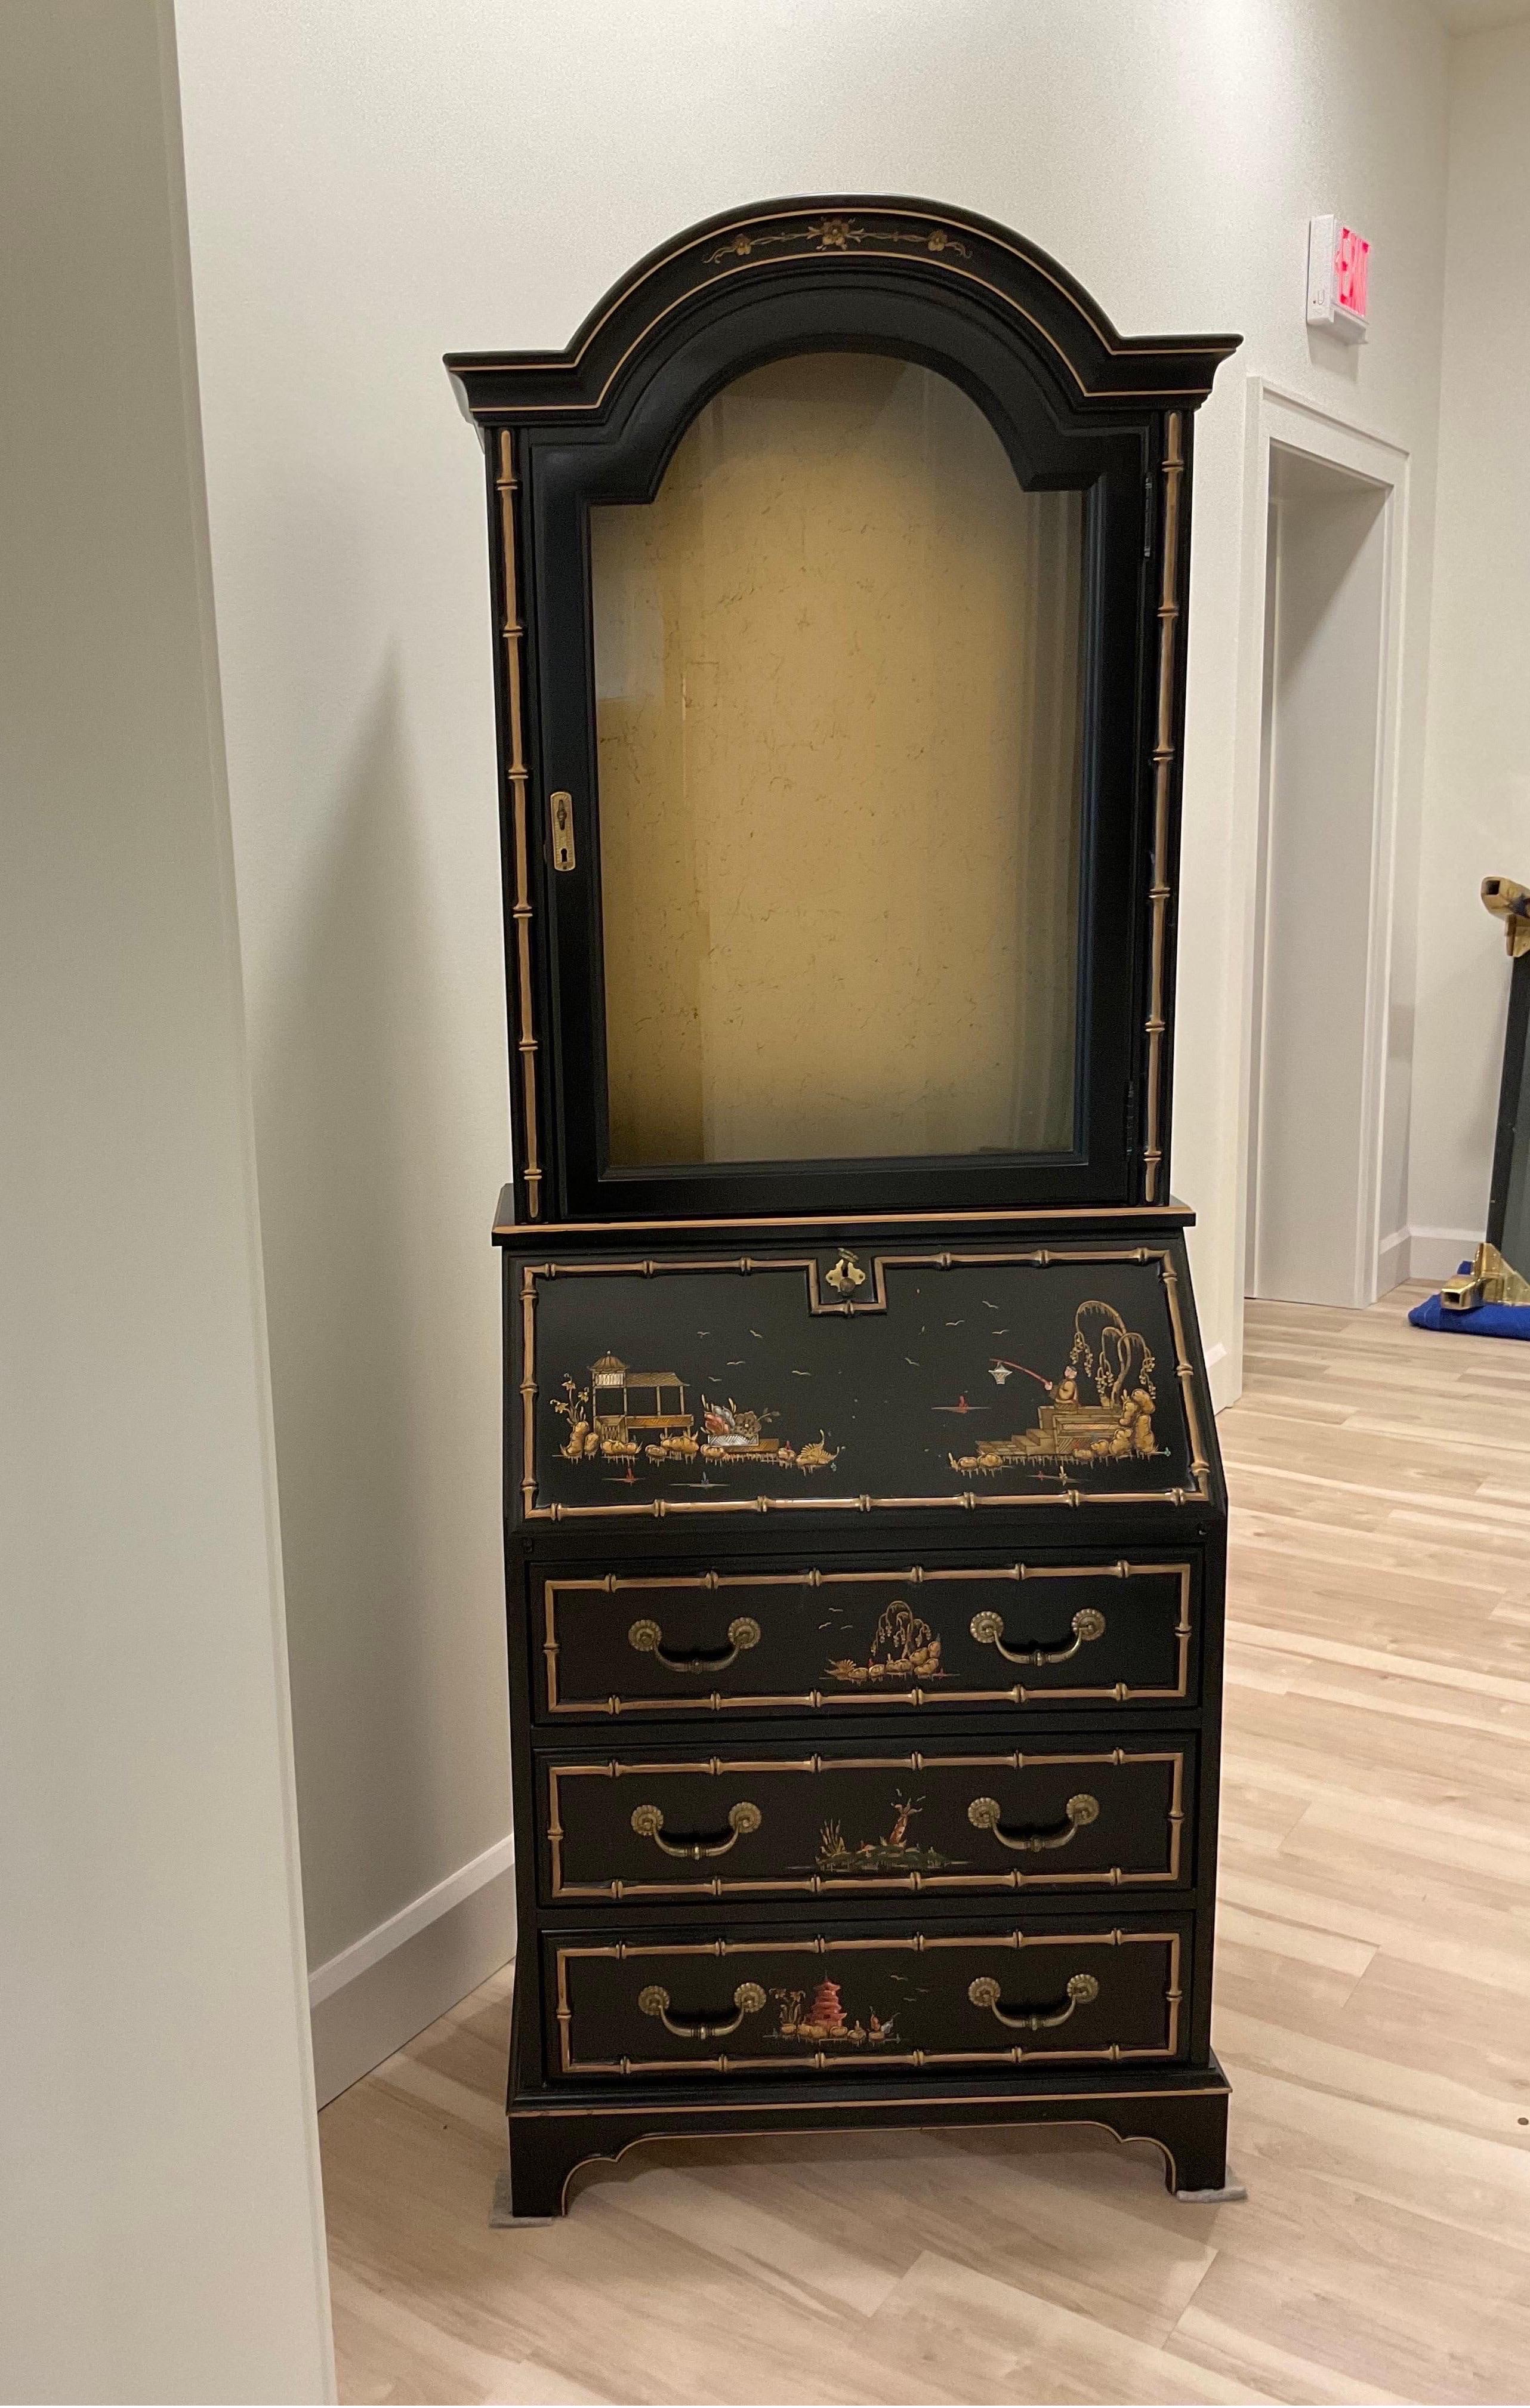 The sweetest Jr Secretary by Jasper Cabinet Co. is 60s chinoiserie in design and nearly perfect in condition if not just that. This little beauty has impeccable details like raised faux bamboo boarders and intricate hand painted Asian scenes.